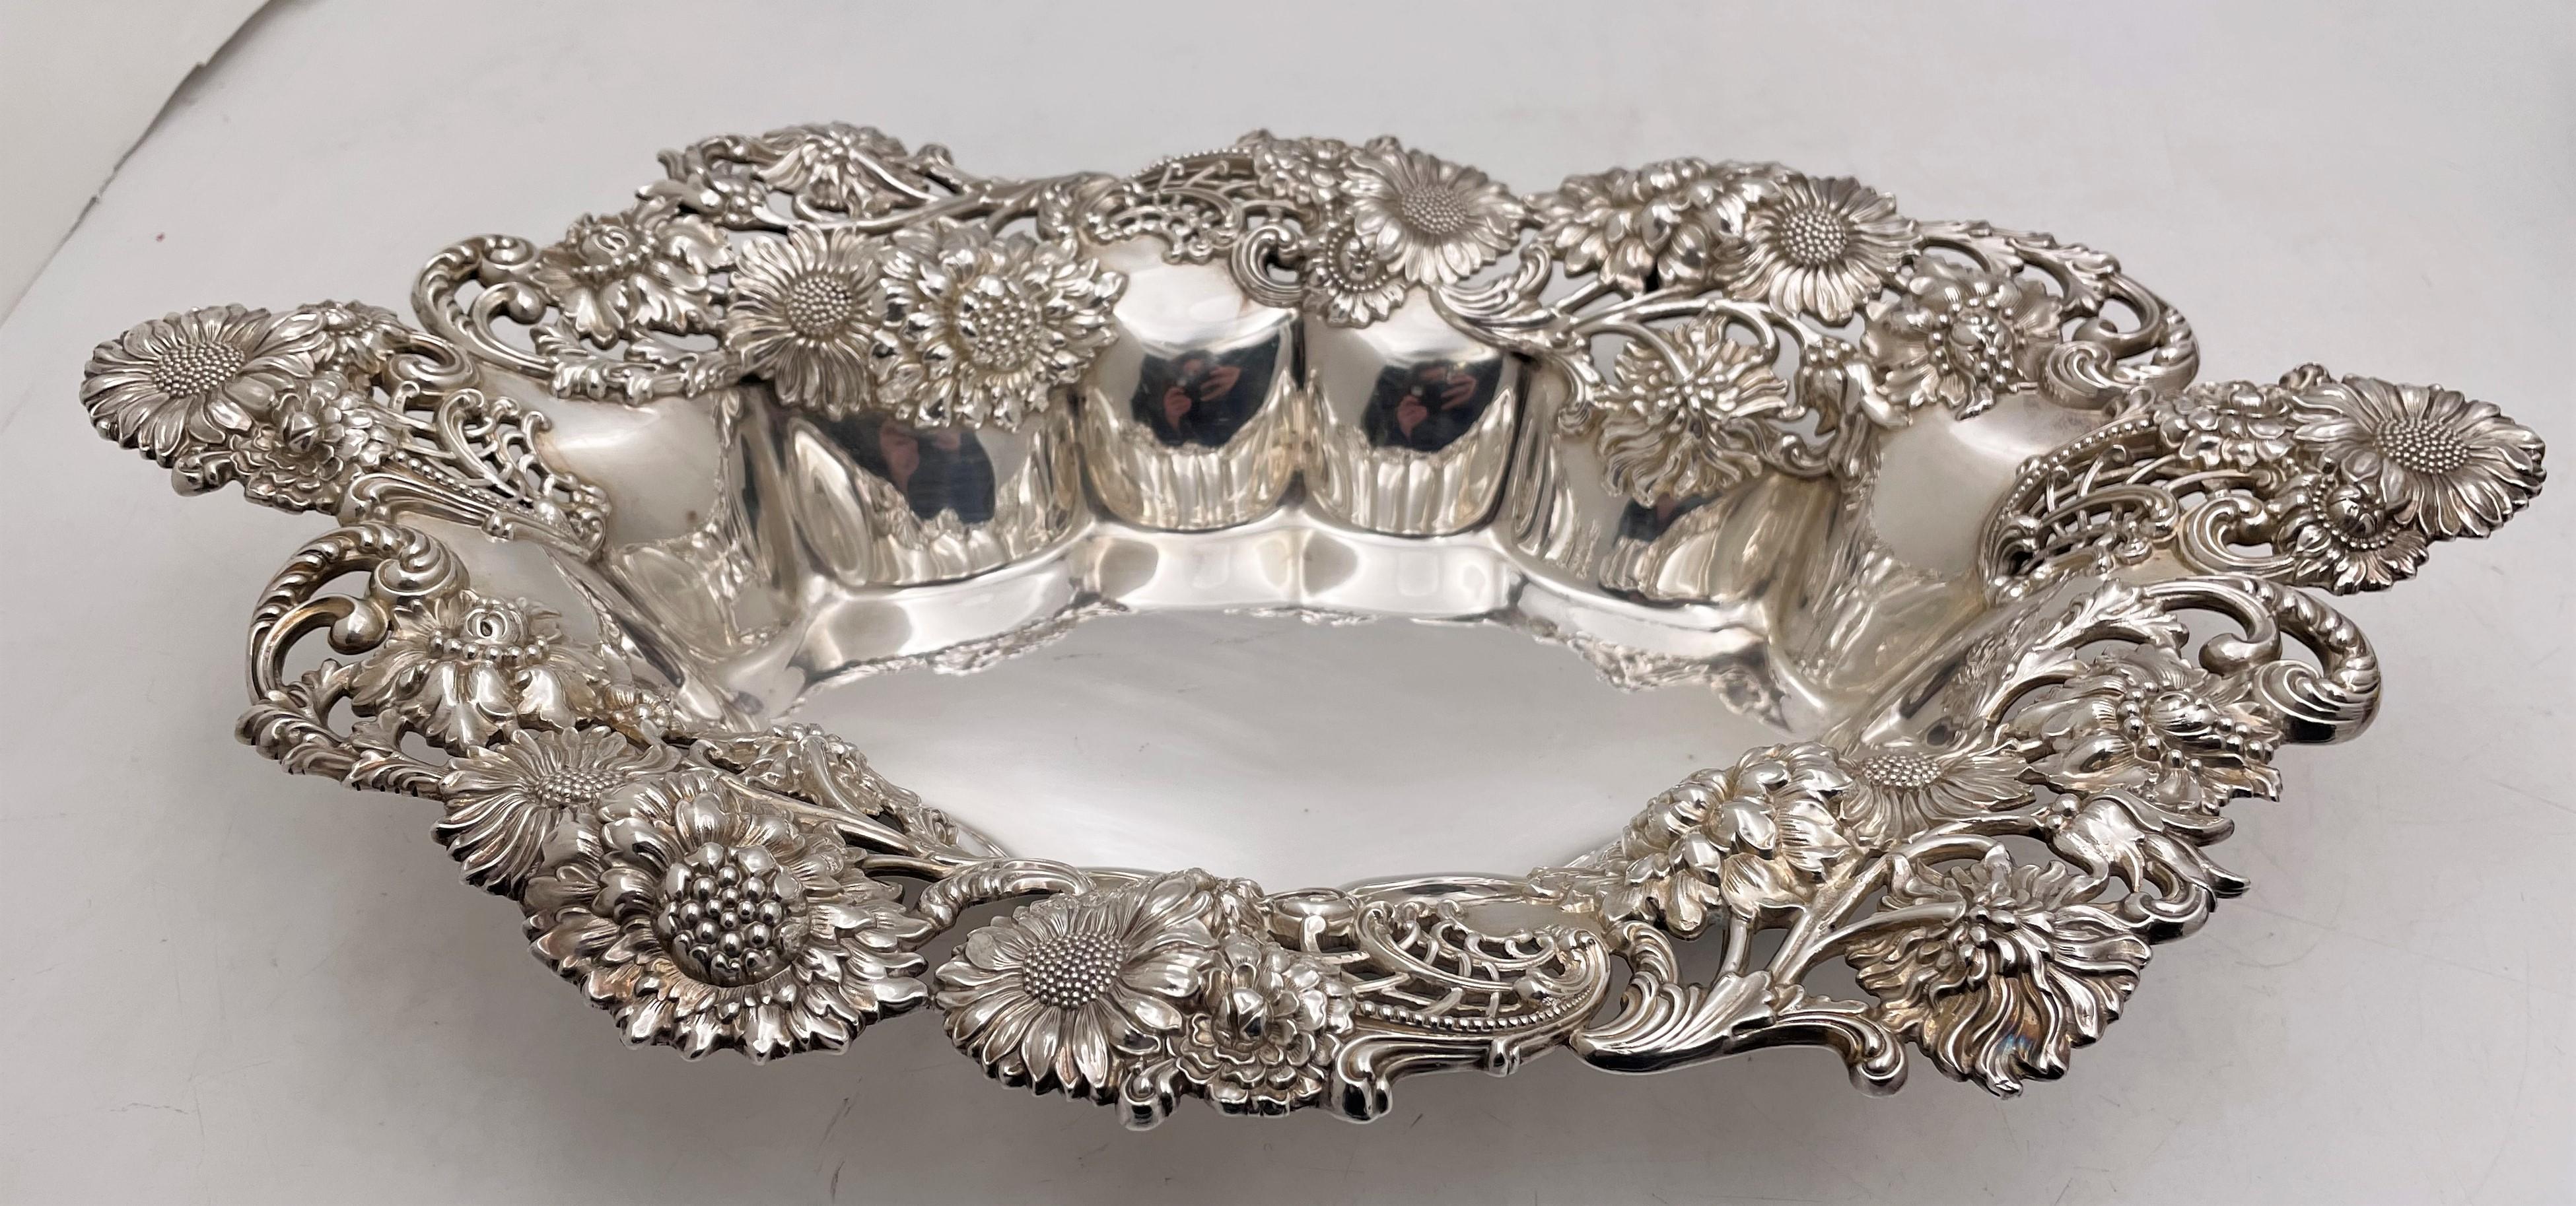 Theodore B. Starr sterling silver centerpiece bowl from the early 20th century in Art Nouveau style with exquisite, raised flowers, including daisies, as well as curvilinear motifs accentuating the multilobed shape of the bowl. It measures 15 1/8''